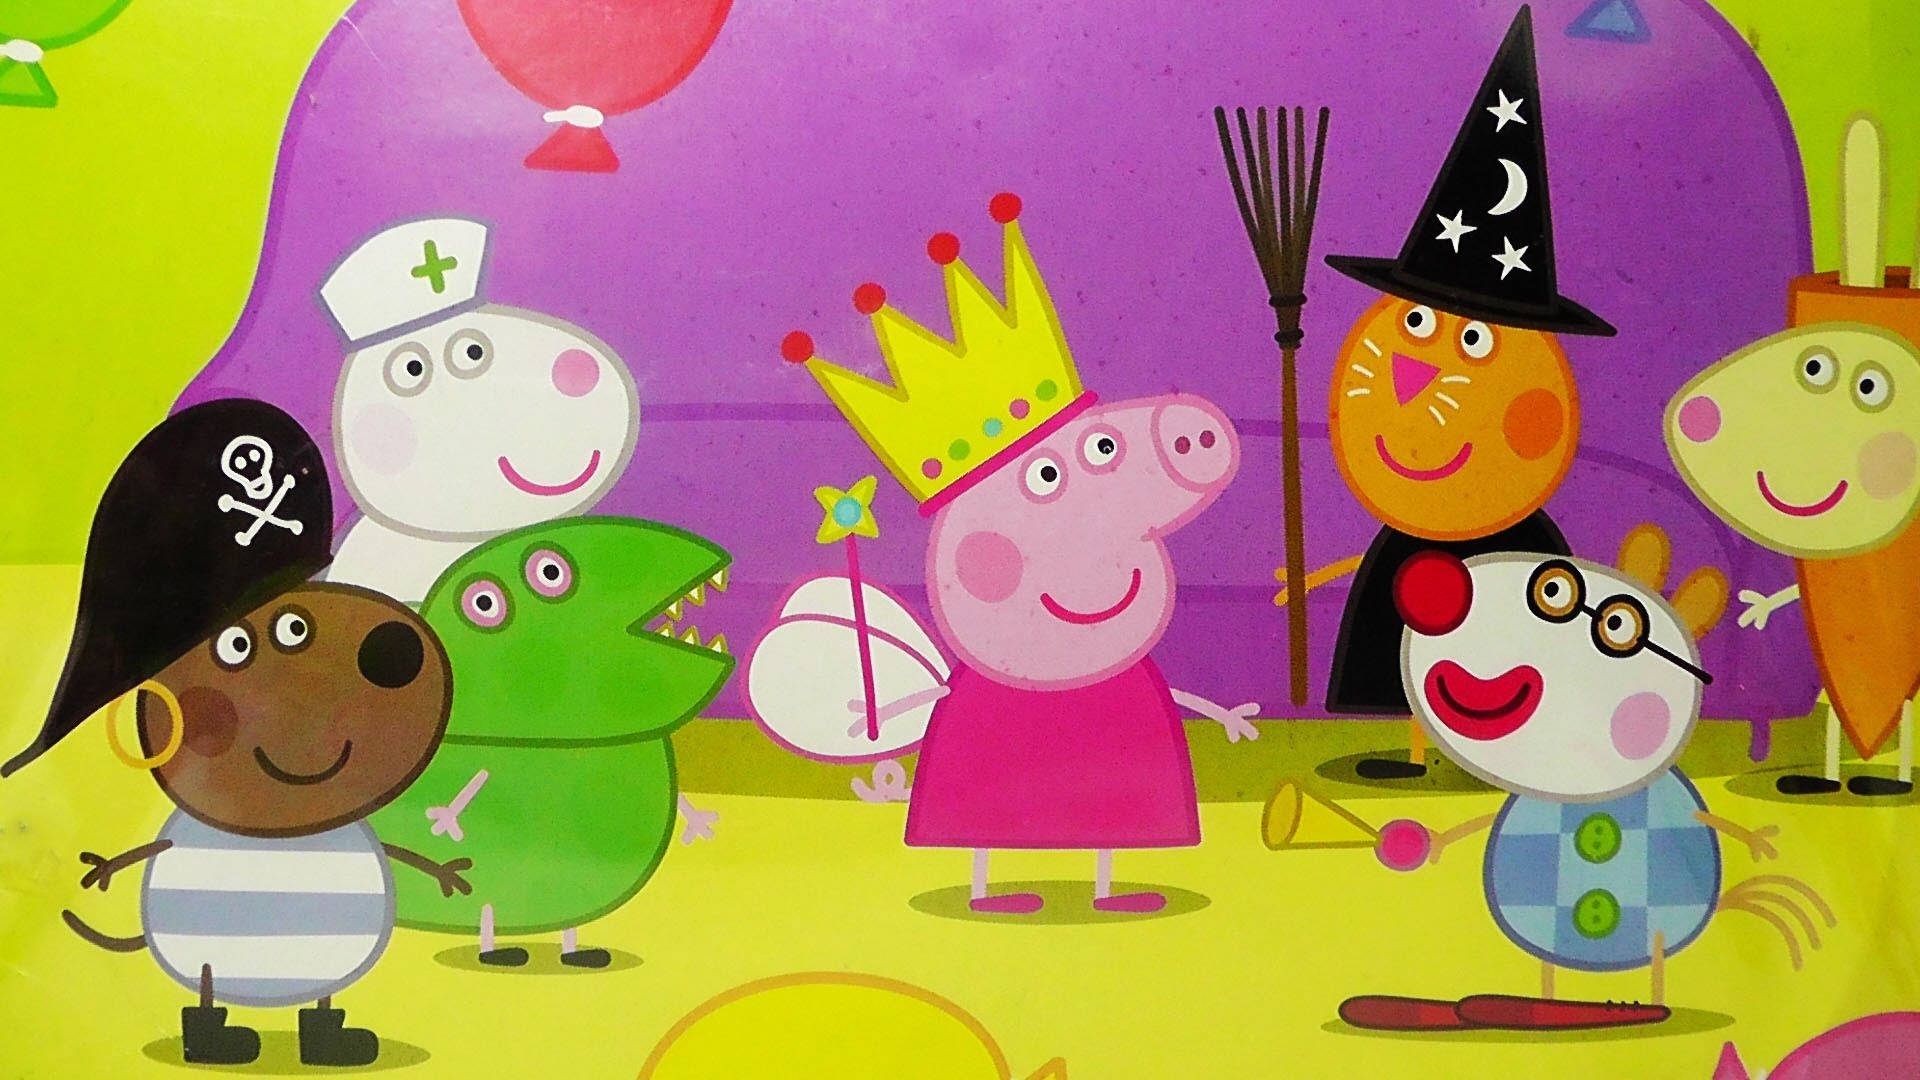 Peppa Pig Costume Party wallpaper.